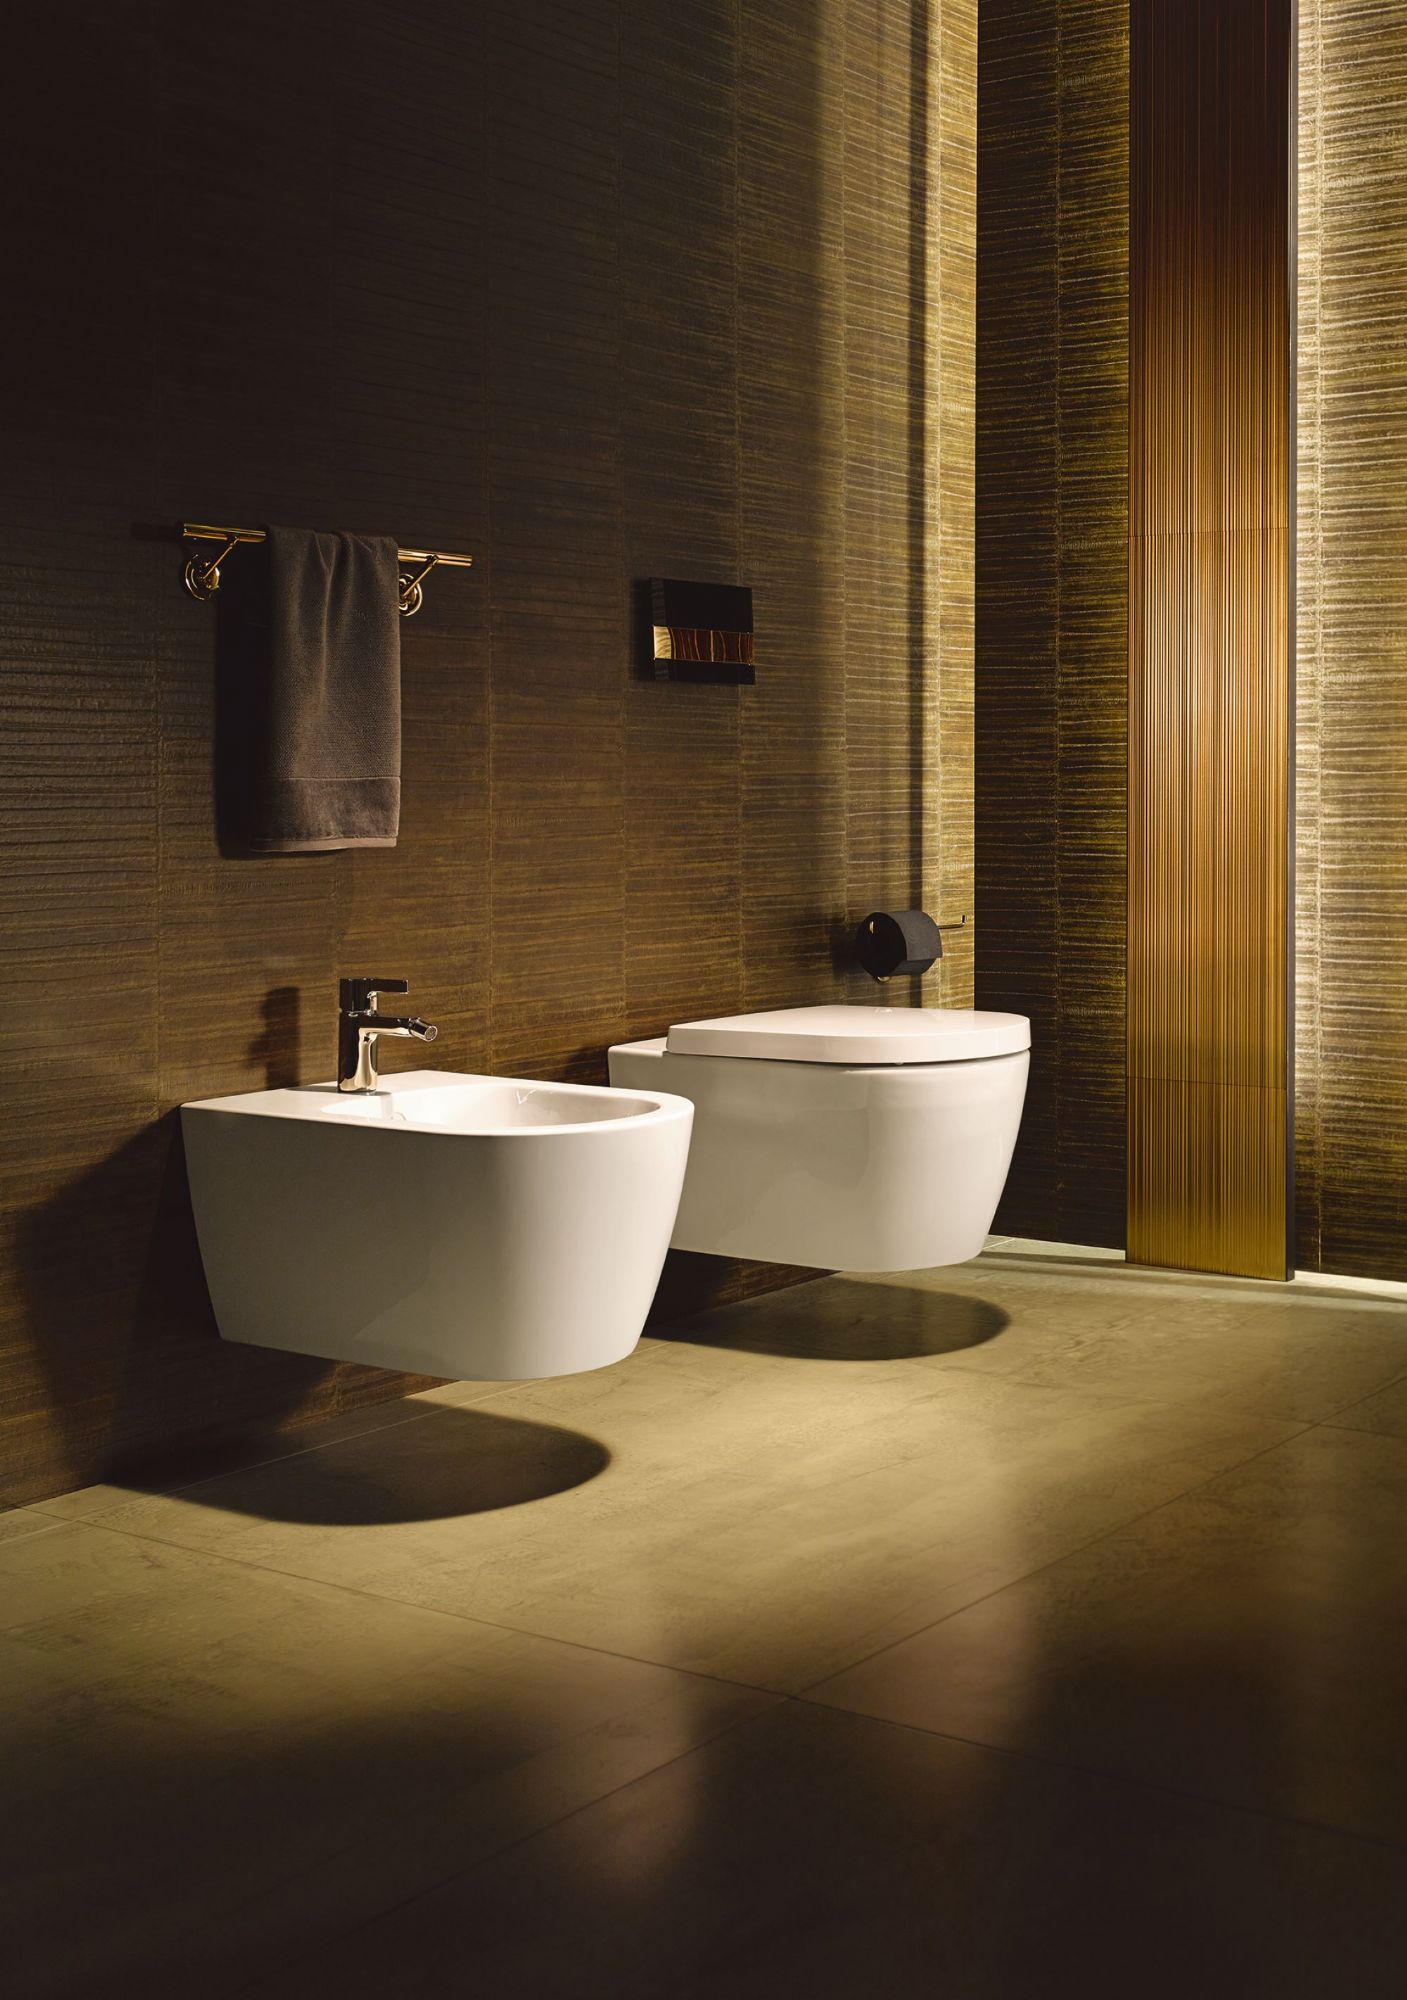 Duravit toilet and seat, available from C.P. Hart